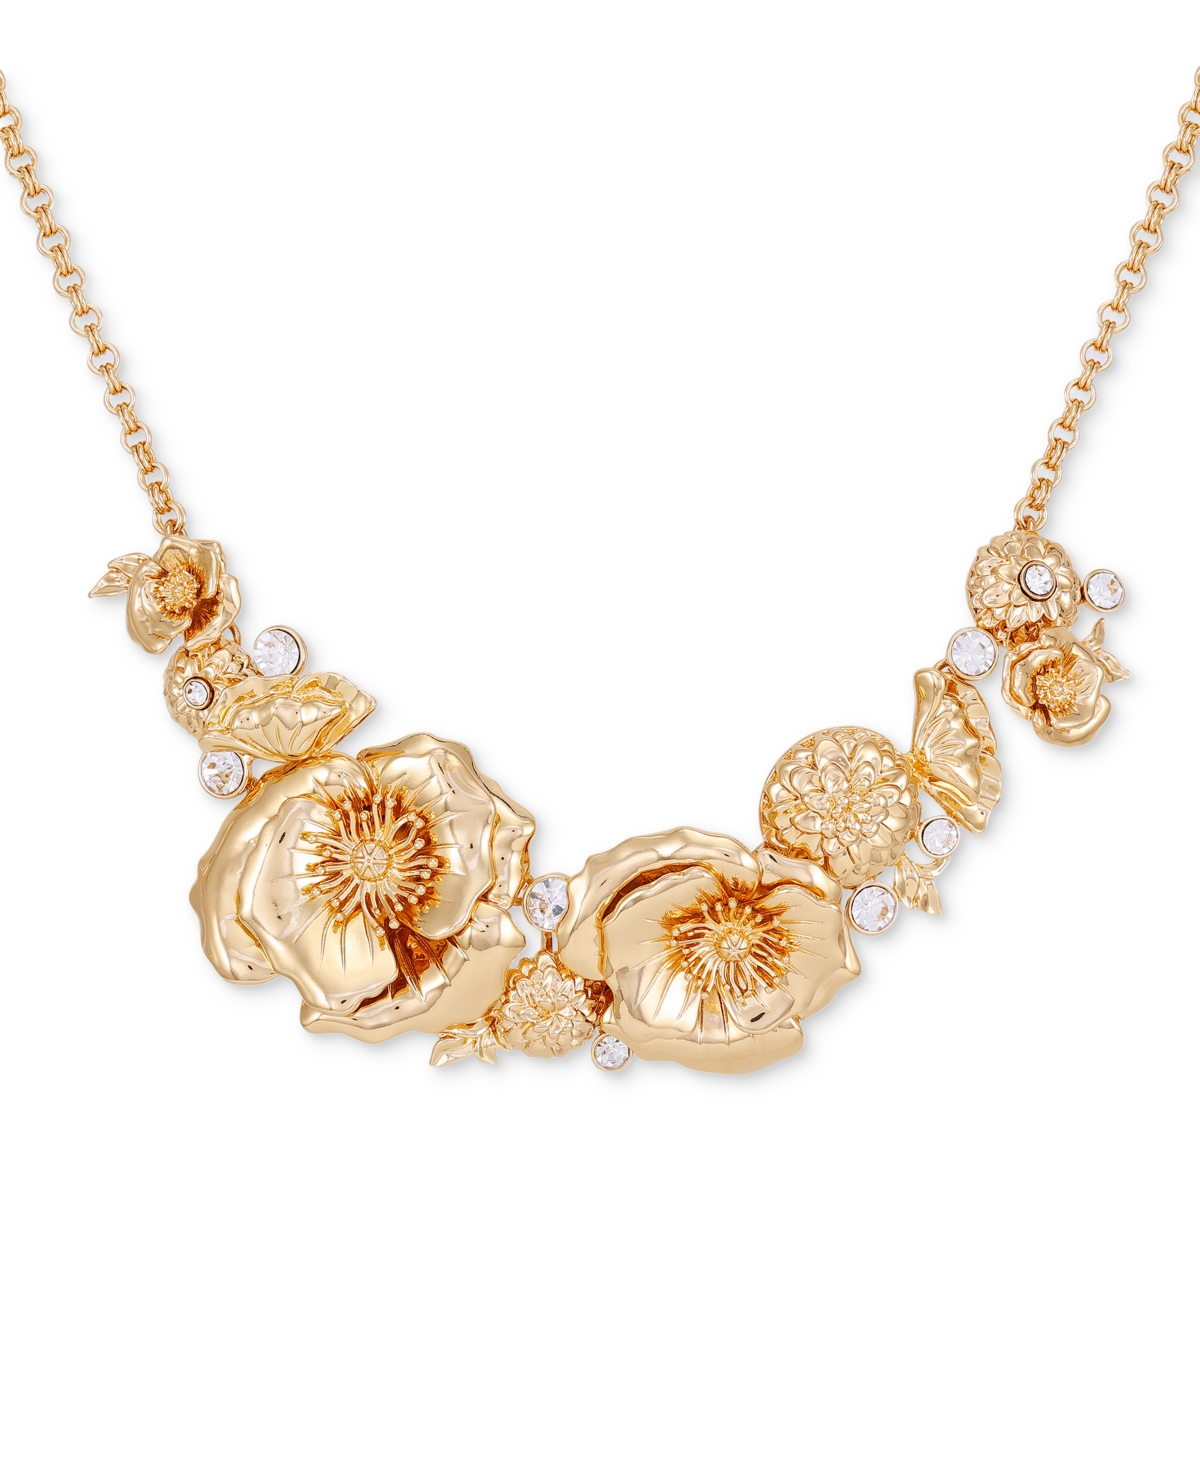 Guess Gold-tone Crystal & Flower Statement Necklace, 16" + 2" Extender